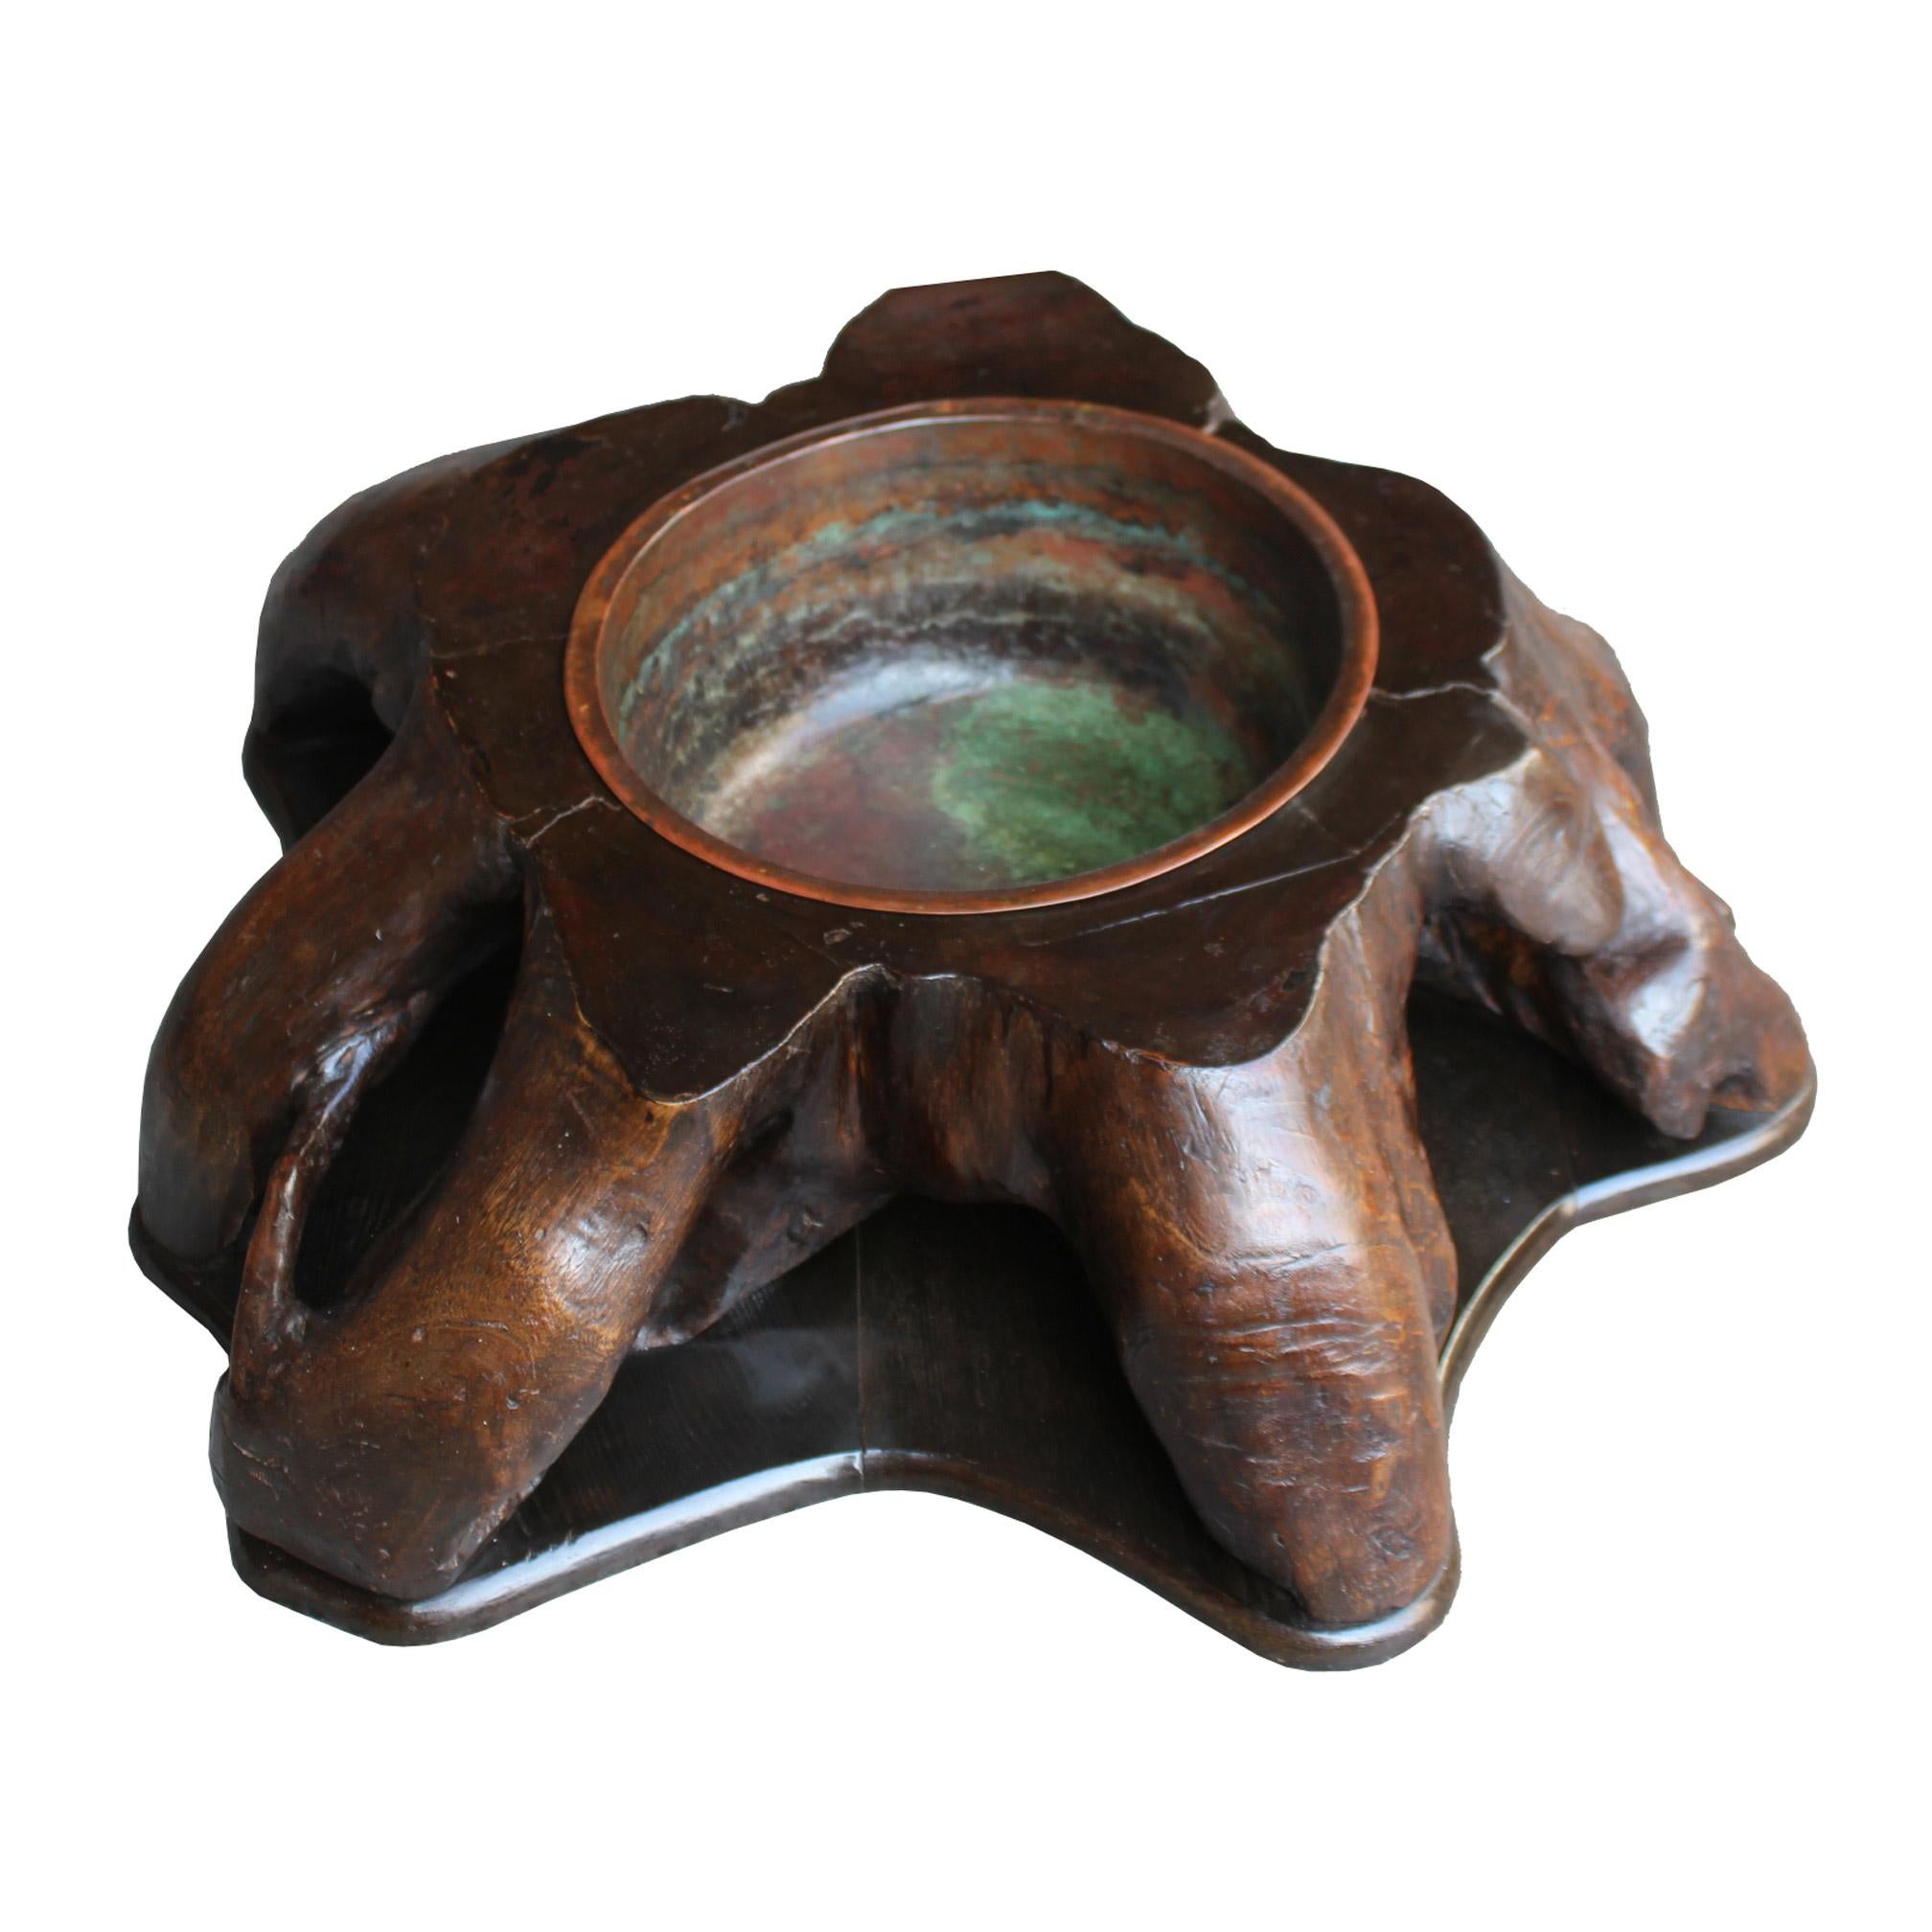 Unusual mingei (folk craft) hand warmer made from Japanese cedar tree root with copper lining was used as a hand warmer for a farmer’s family to keep warm during cold weather. Place next to a fireplace to store wood or next to an armchair for